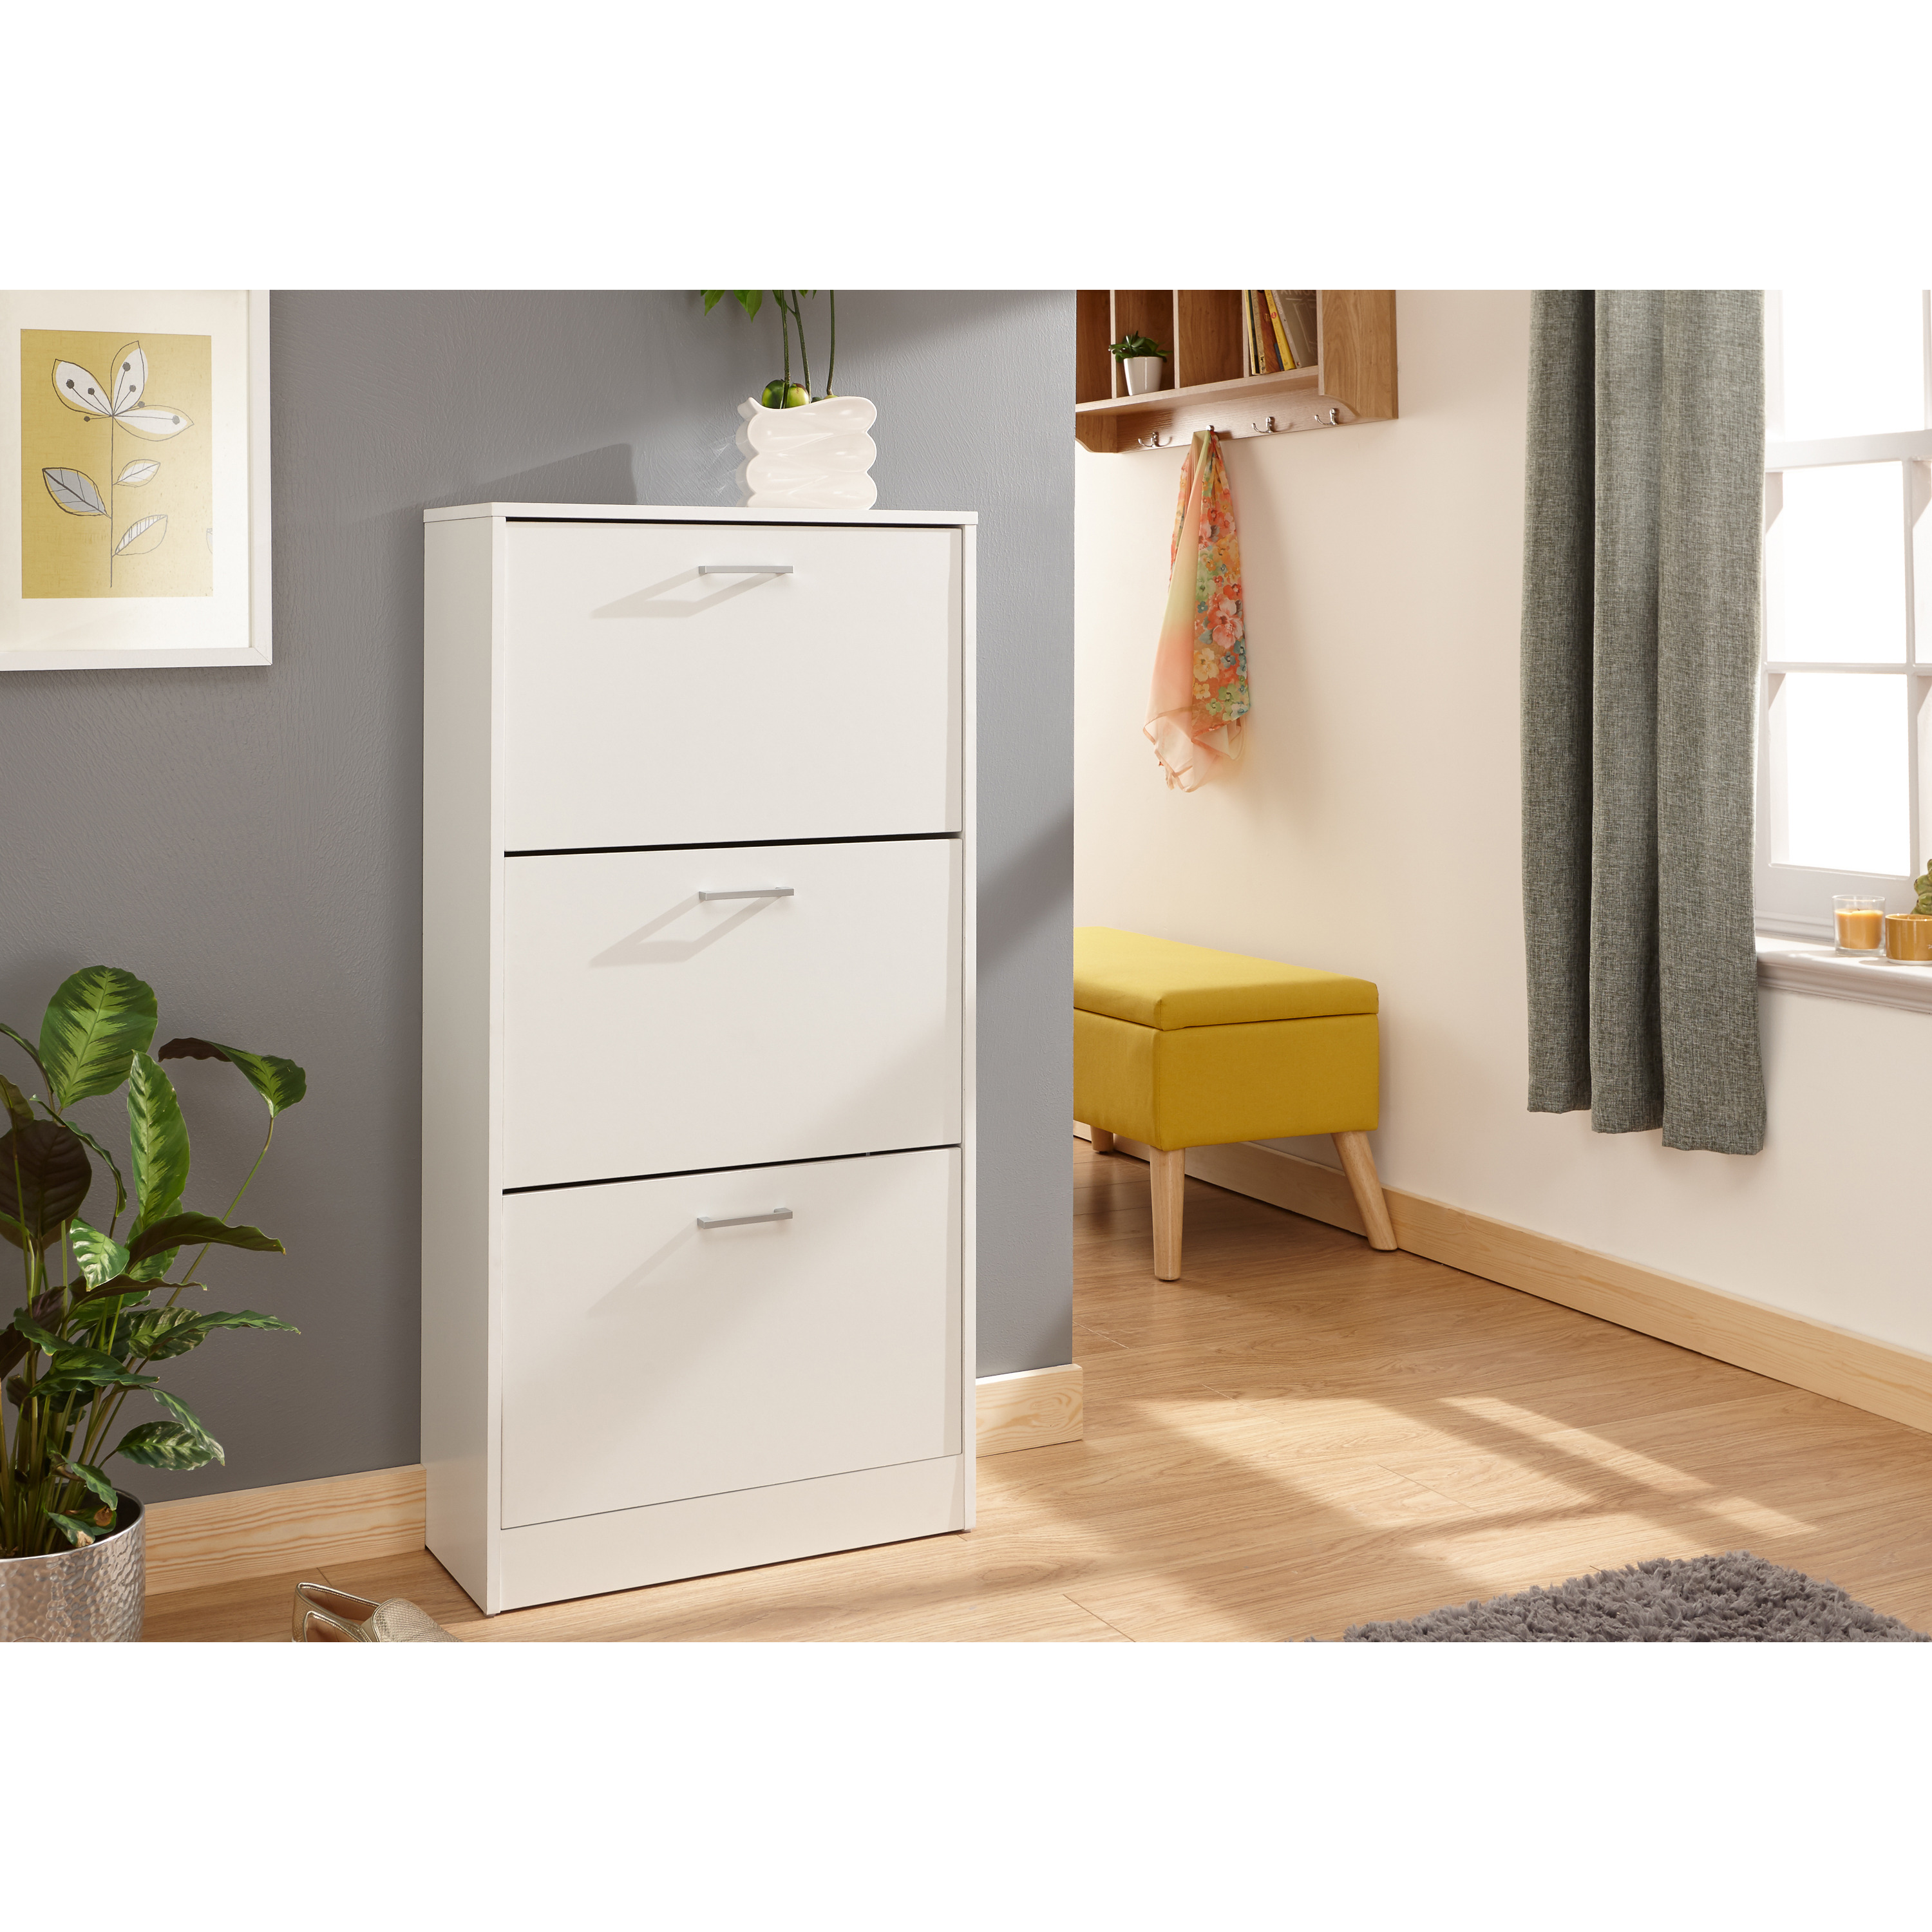 GFW Stirling Three Tier Shoe Cabinet White - image 1